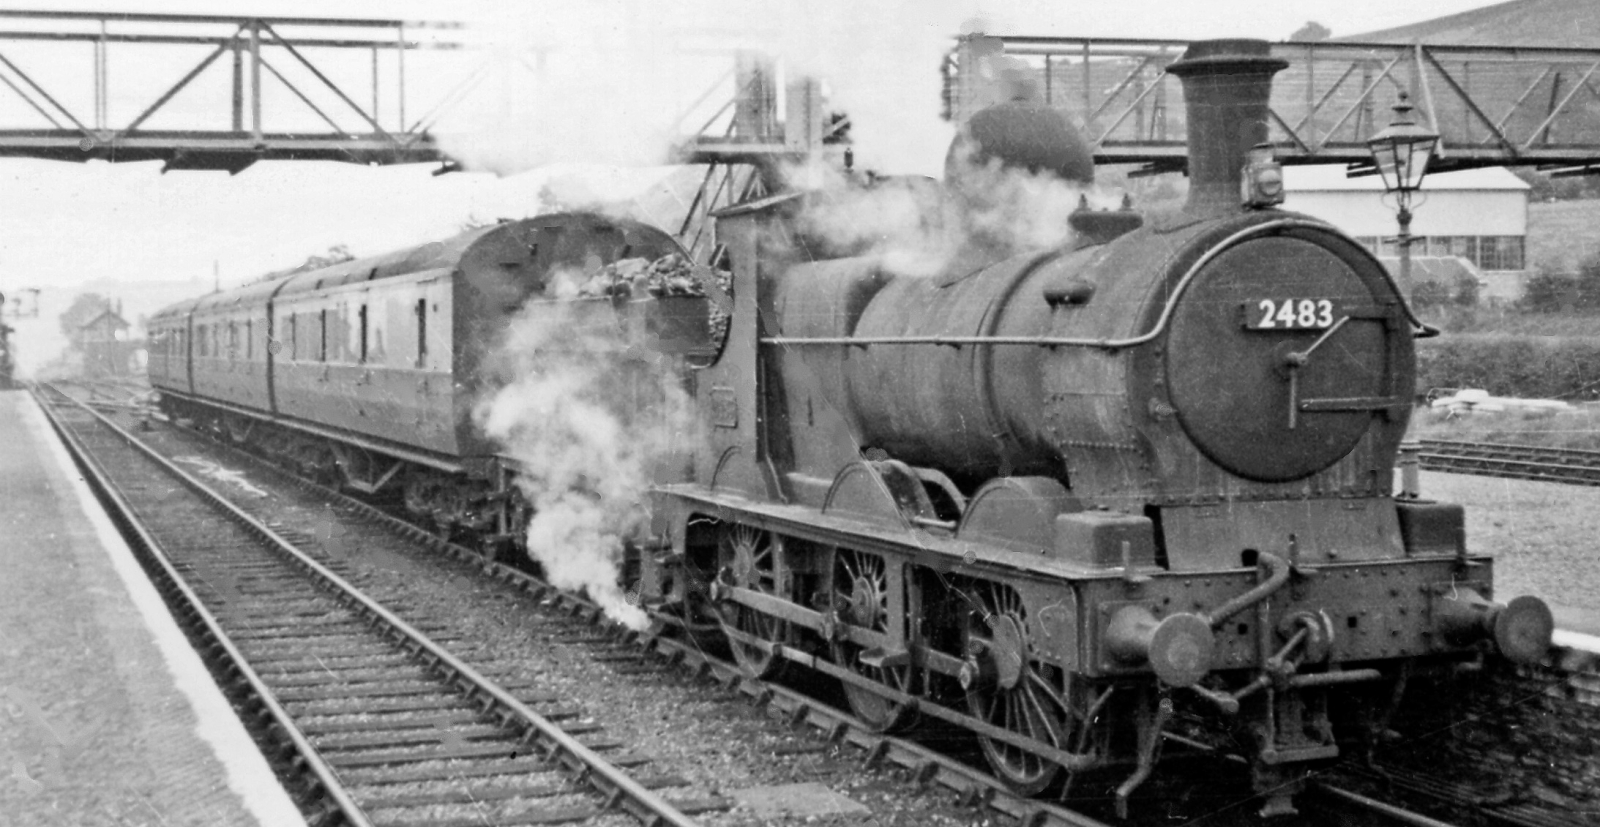 No. 2483 in August 1949 with a passenger train at Llandidloes, Wales